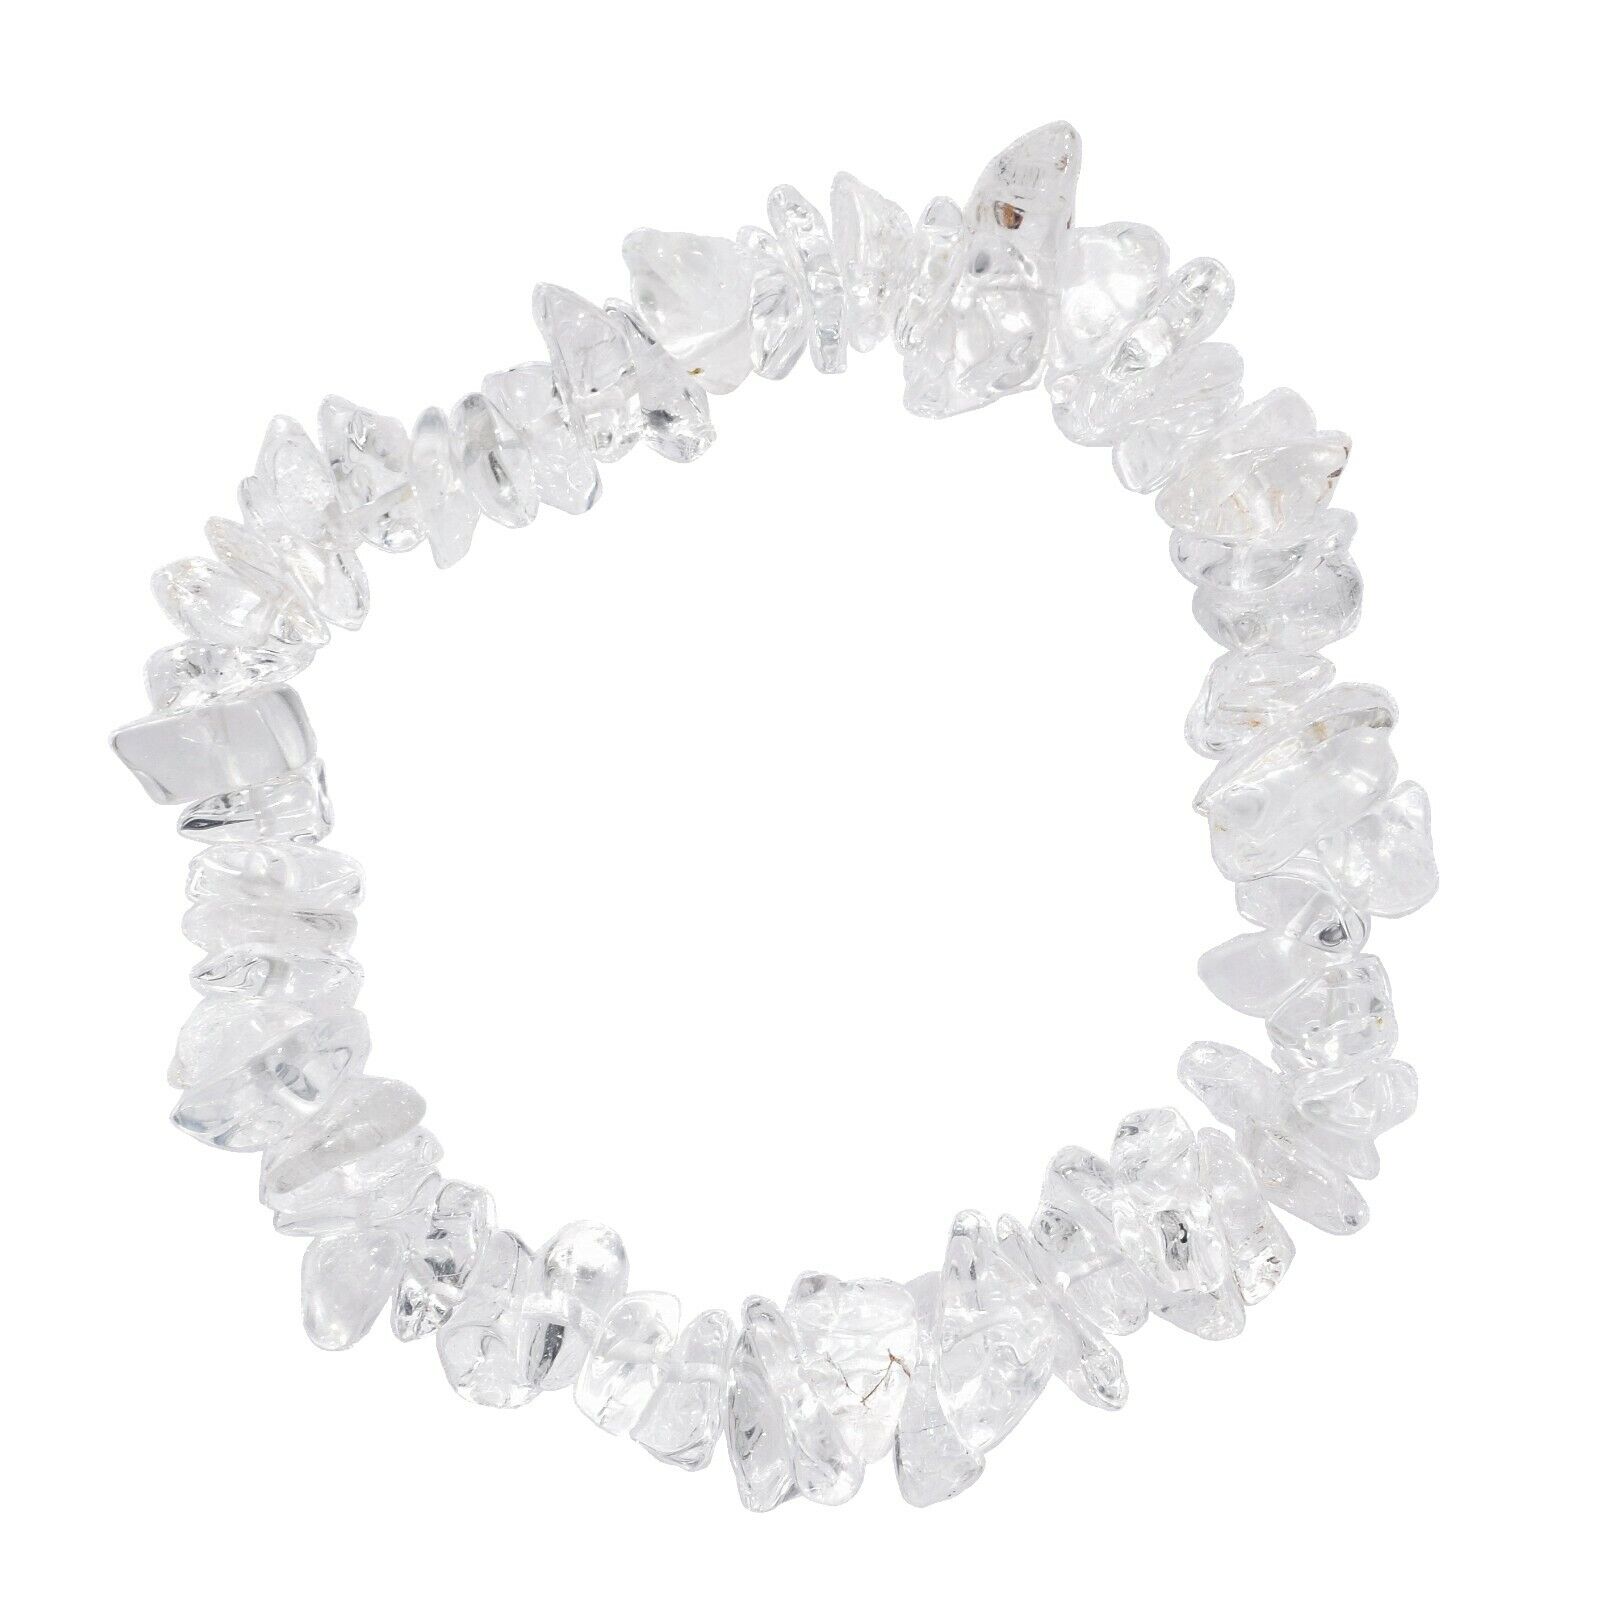 CHARGED Amplifier (Clear) Quartz Crystal Chip Stretchy Bracelet + Selenit Heart